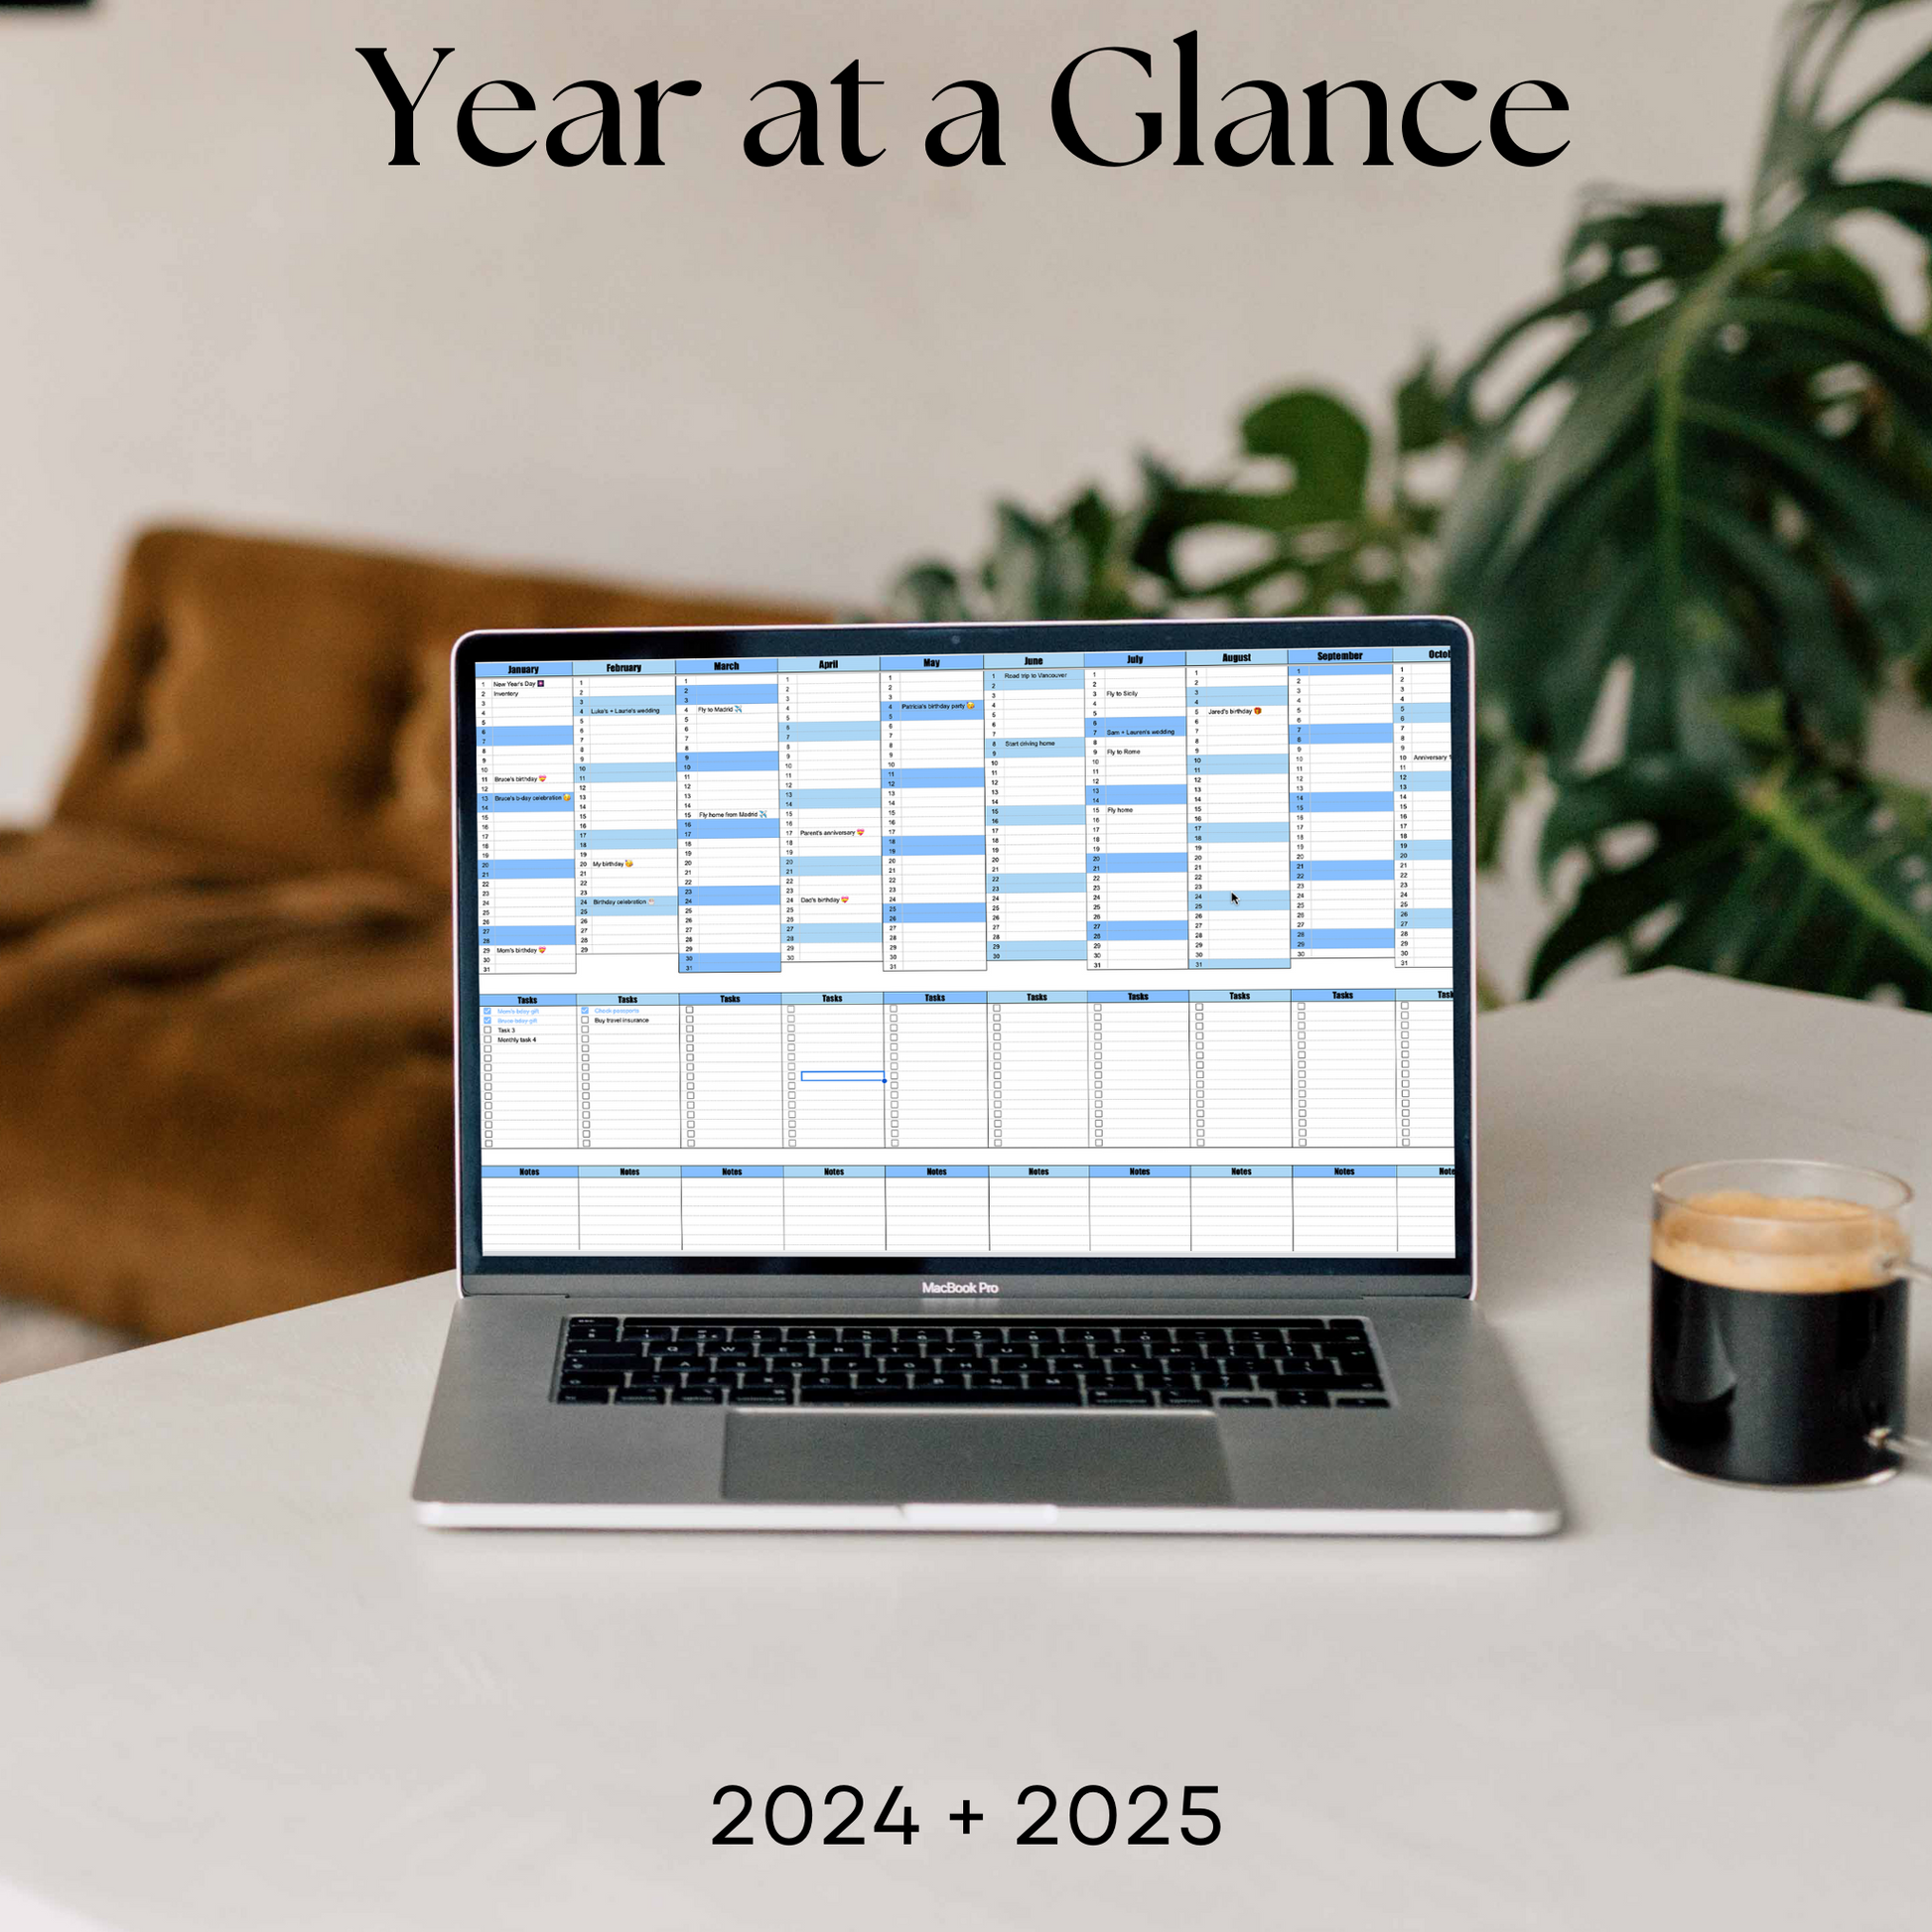 Snapshot of the multi-year 2024 and 2025 Year-at-a-Glance Annual Calendar for Google Sheets, a productivity tool designed for efficient goal planning and tracking. The image showcases a visually organized spreadsheet layout for annual overview.